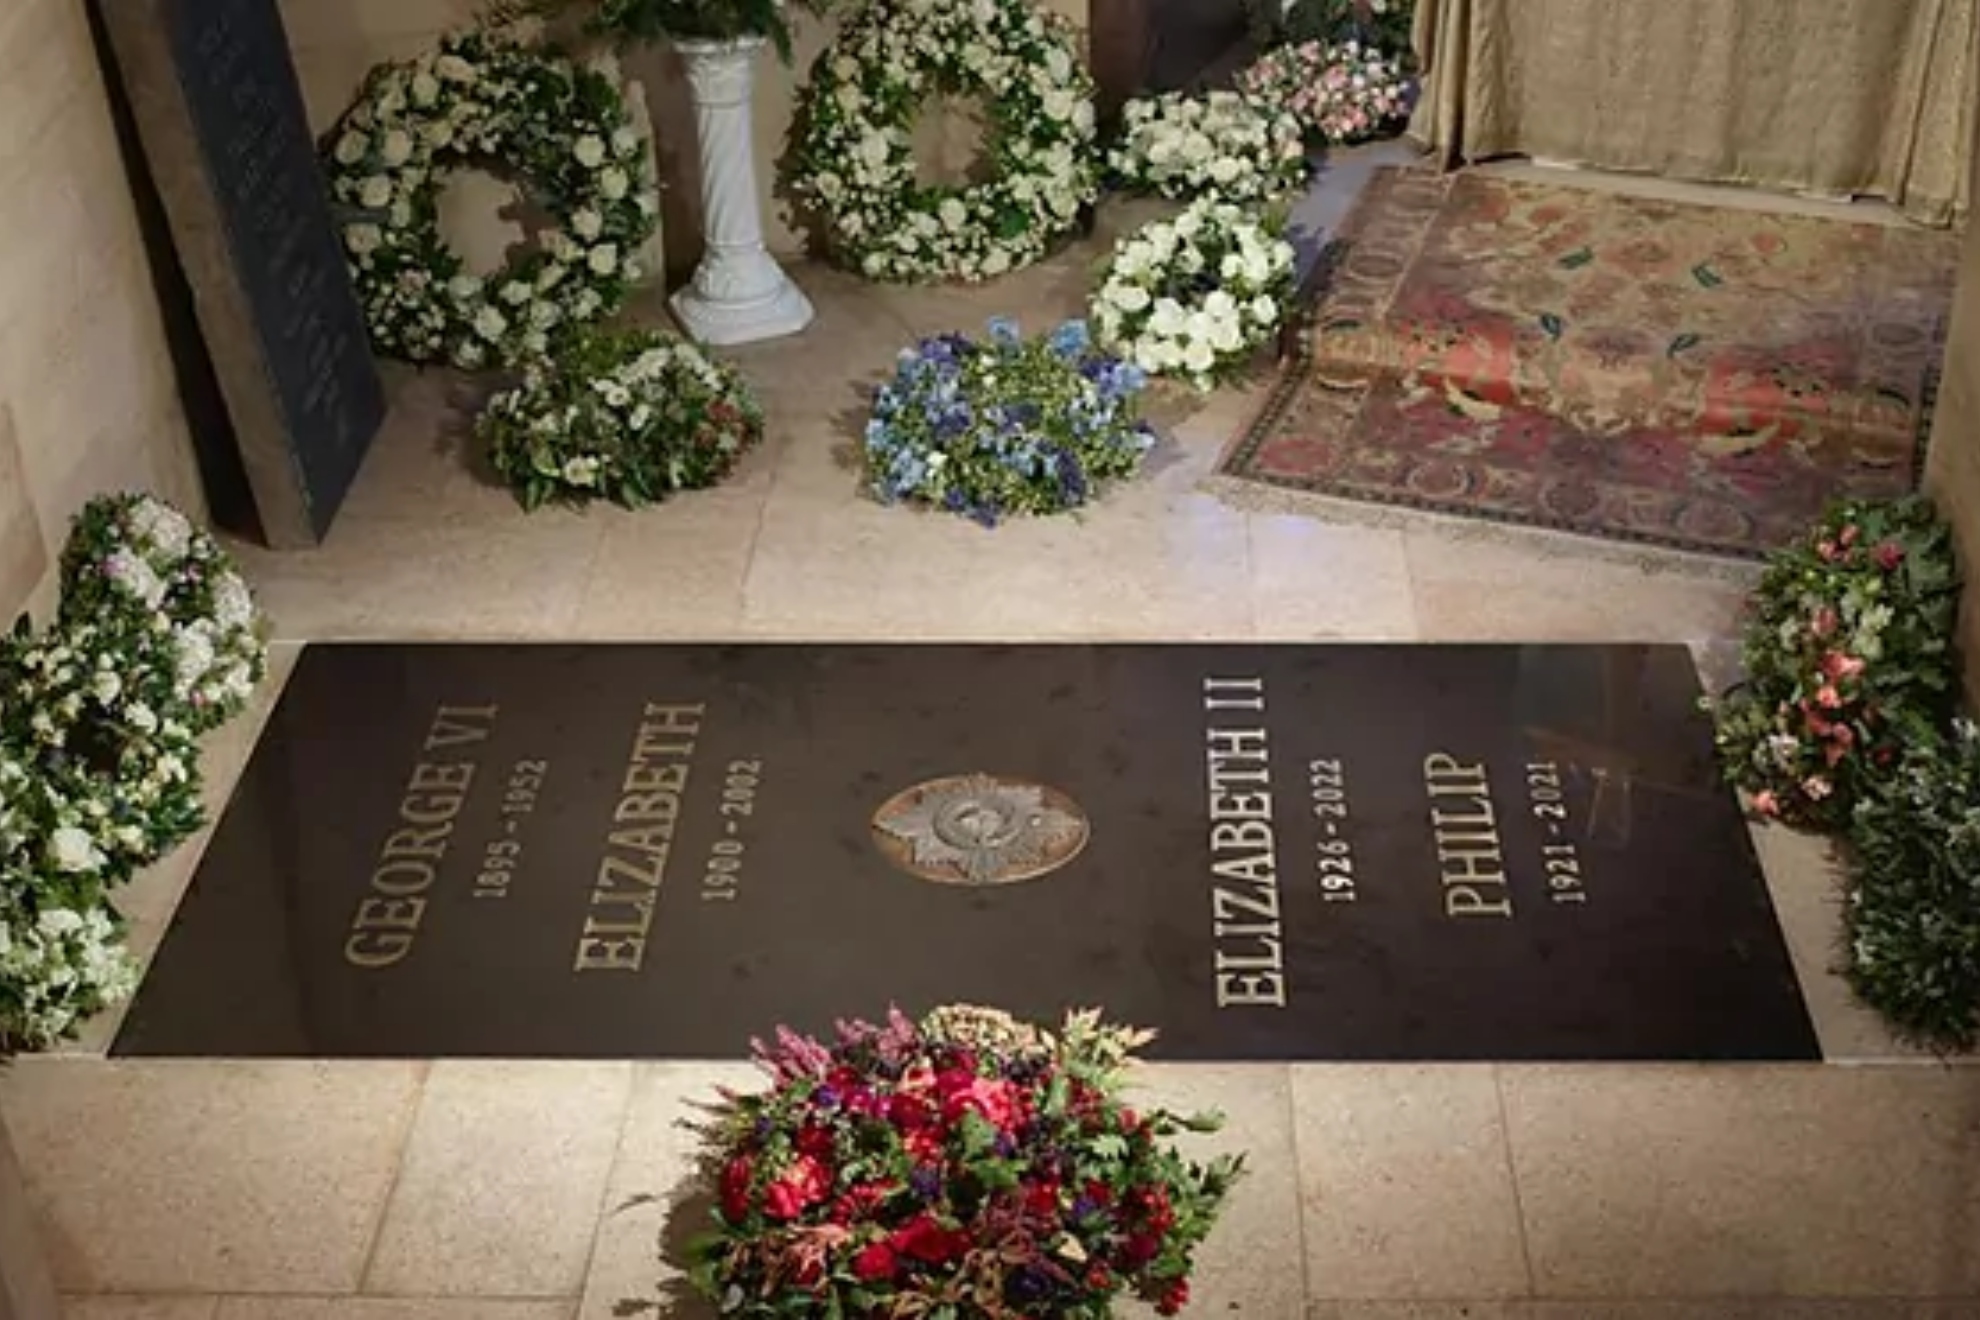 Queen Elizabeth's final resting place / Twitter @RoyalFamily